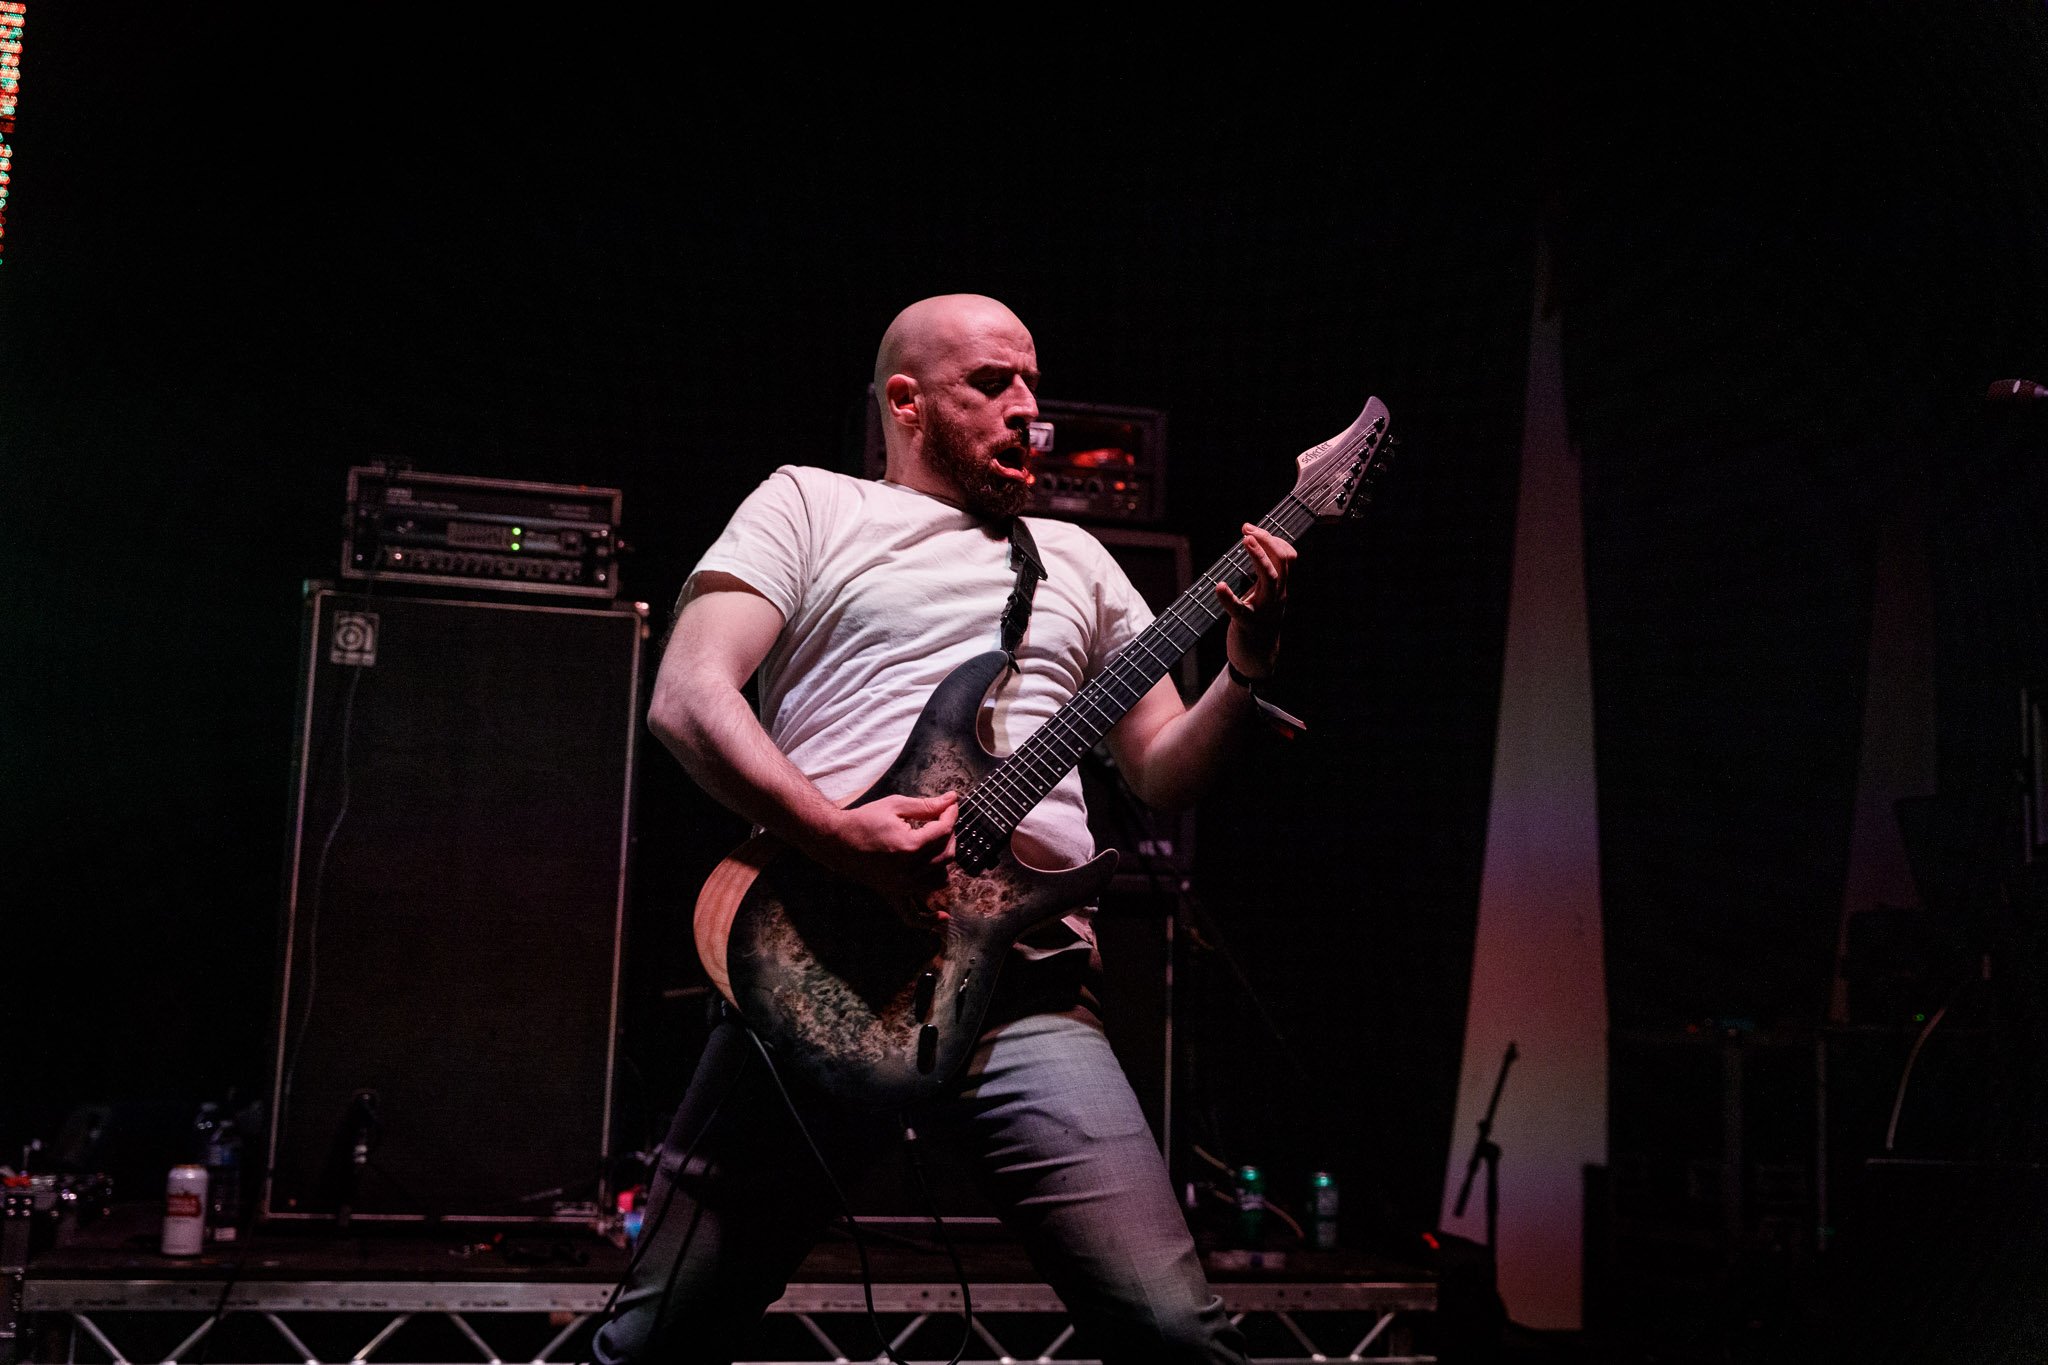 Ithaca at the Damnation Festival in Manchester on November 3rd 2